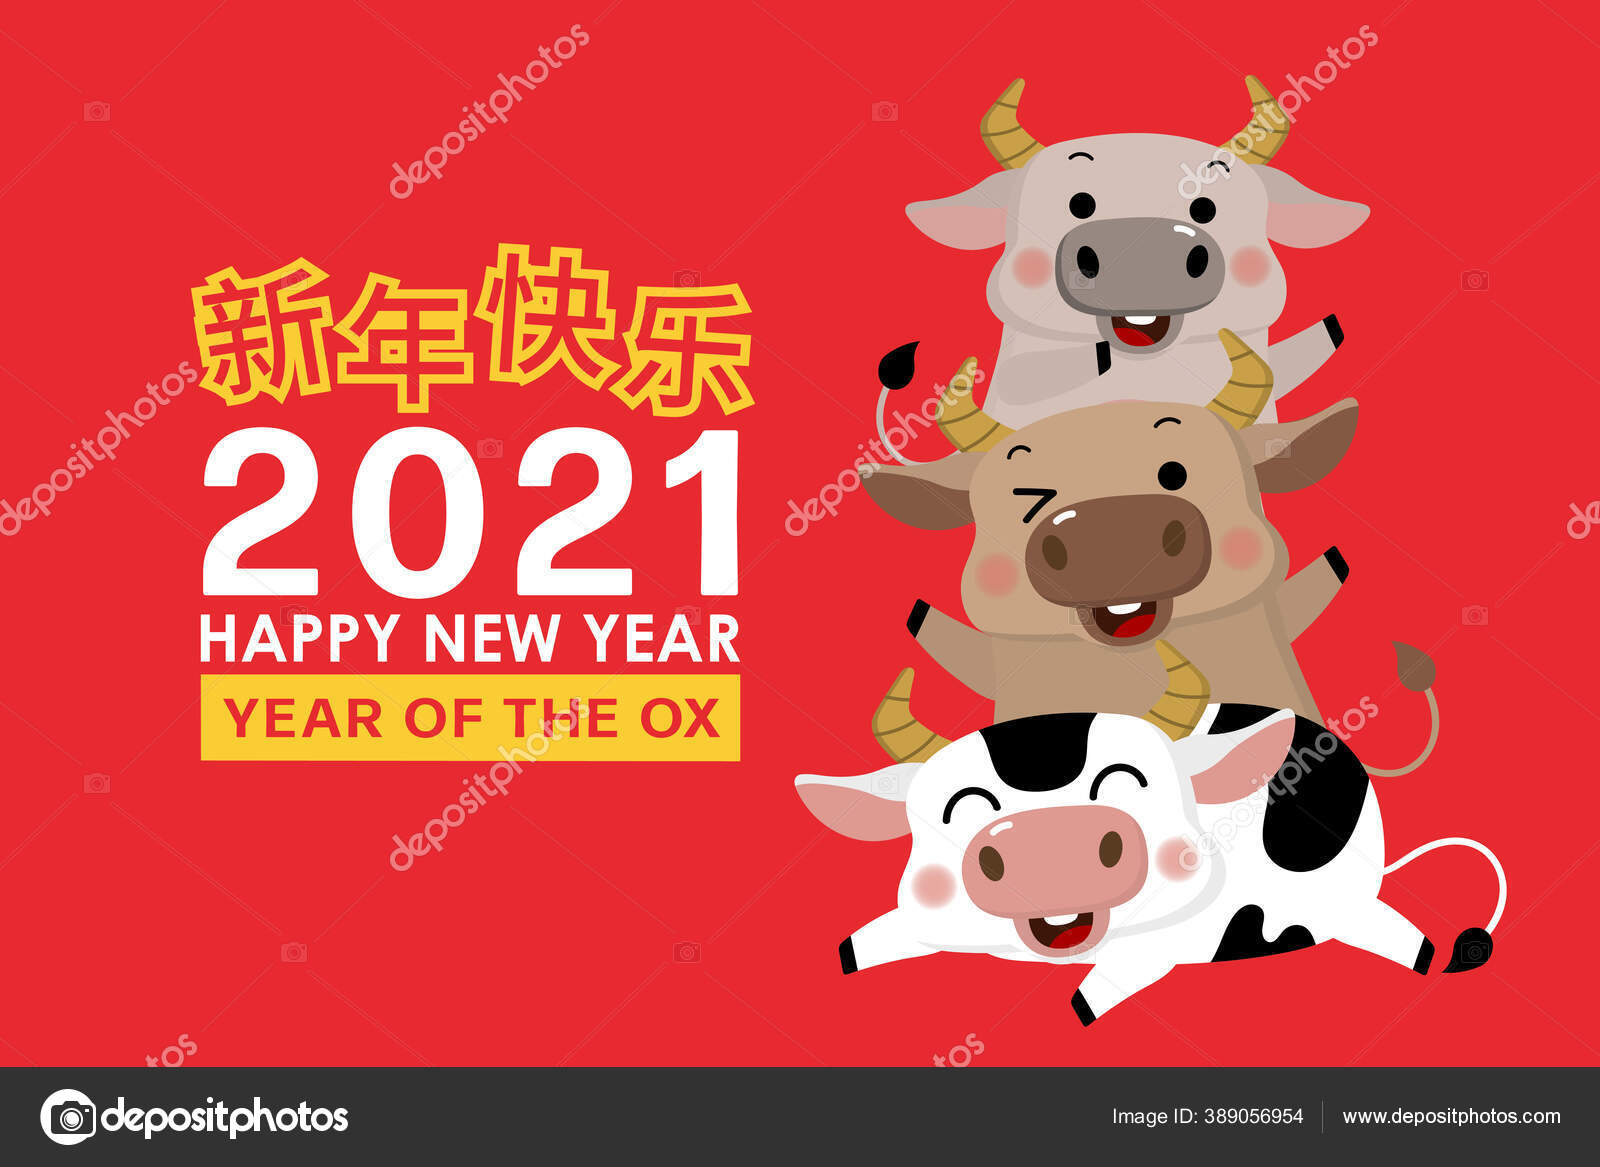 Happy Chinese New Year Greeting Card 2021 Year Three Cute Vector Image By C Dusida Vector Stock 389056954